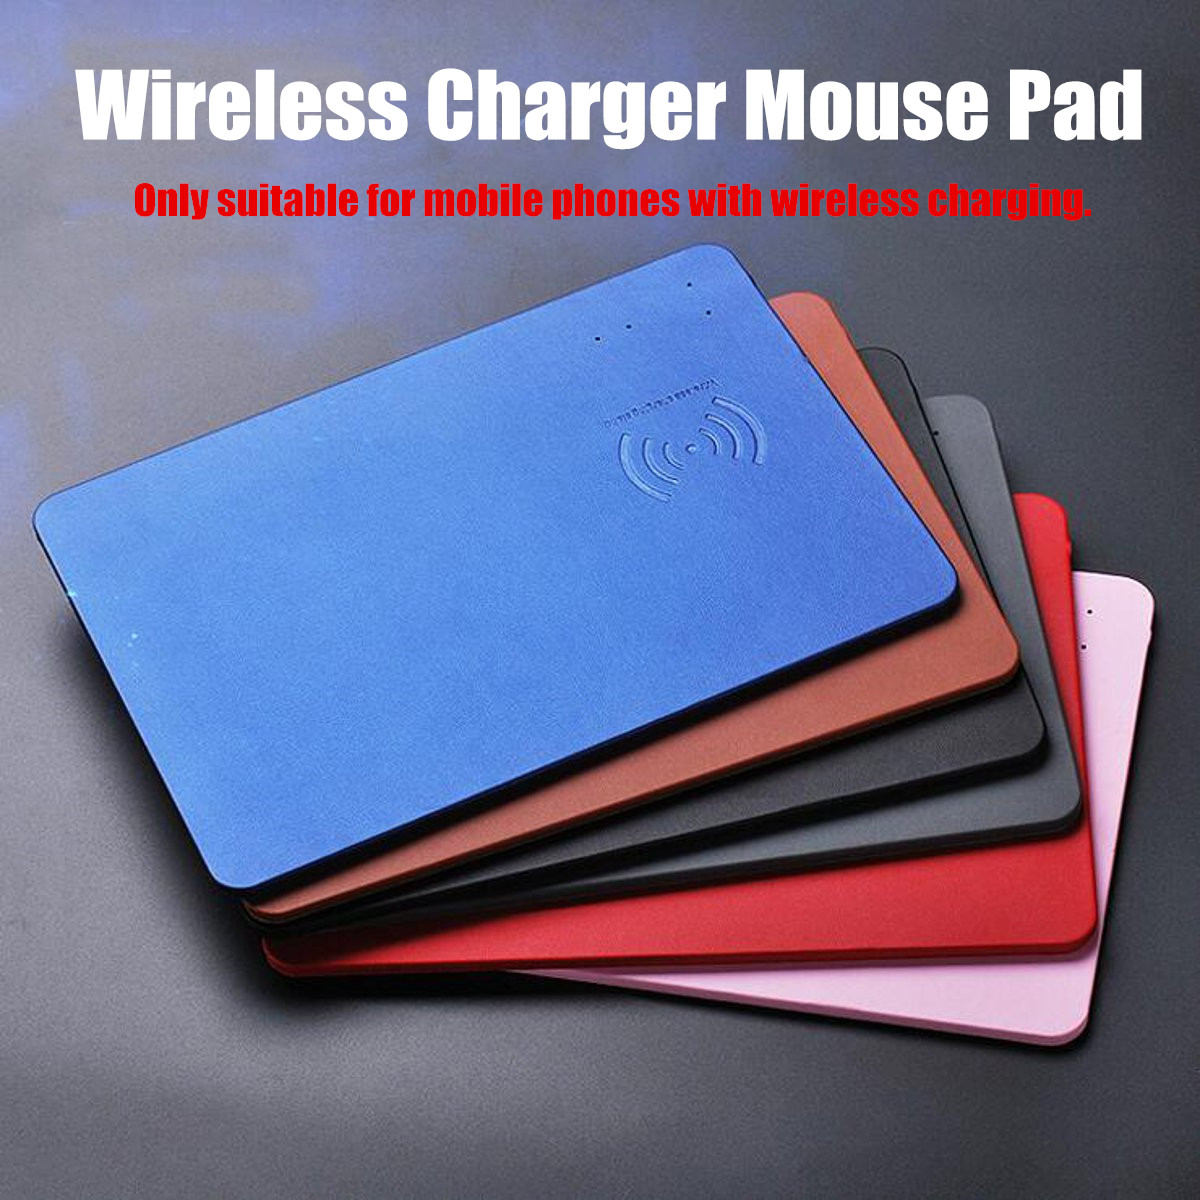 Imitation Leather Mobile Phones Wireless Fast Charger Mouse Pad Qi Wireless Charging 9